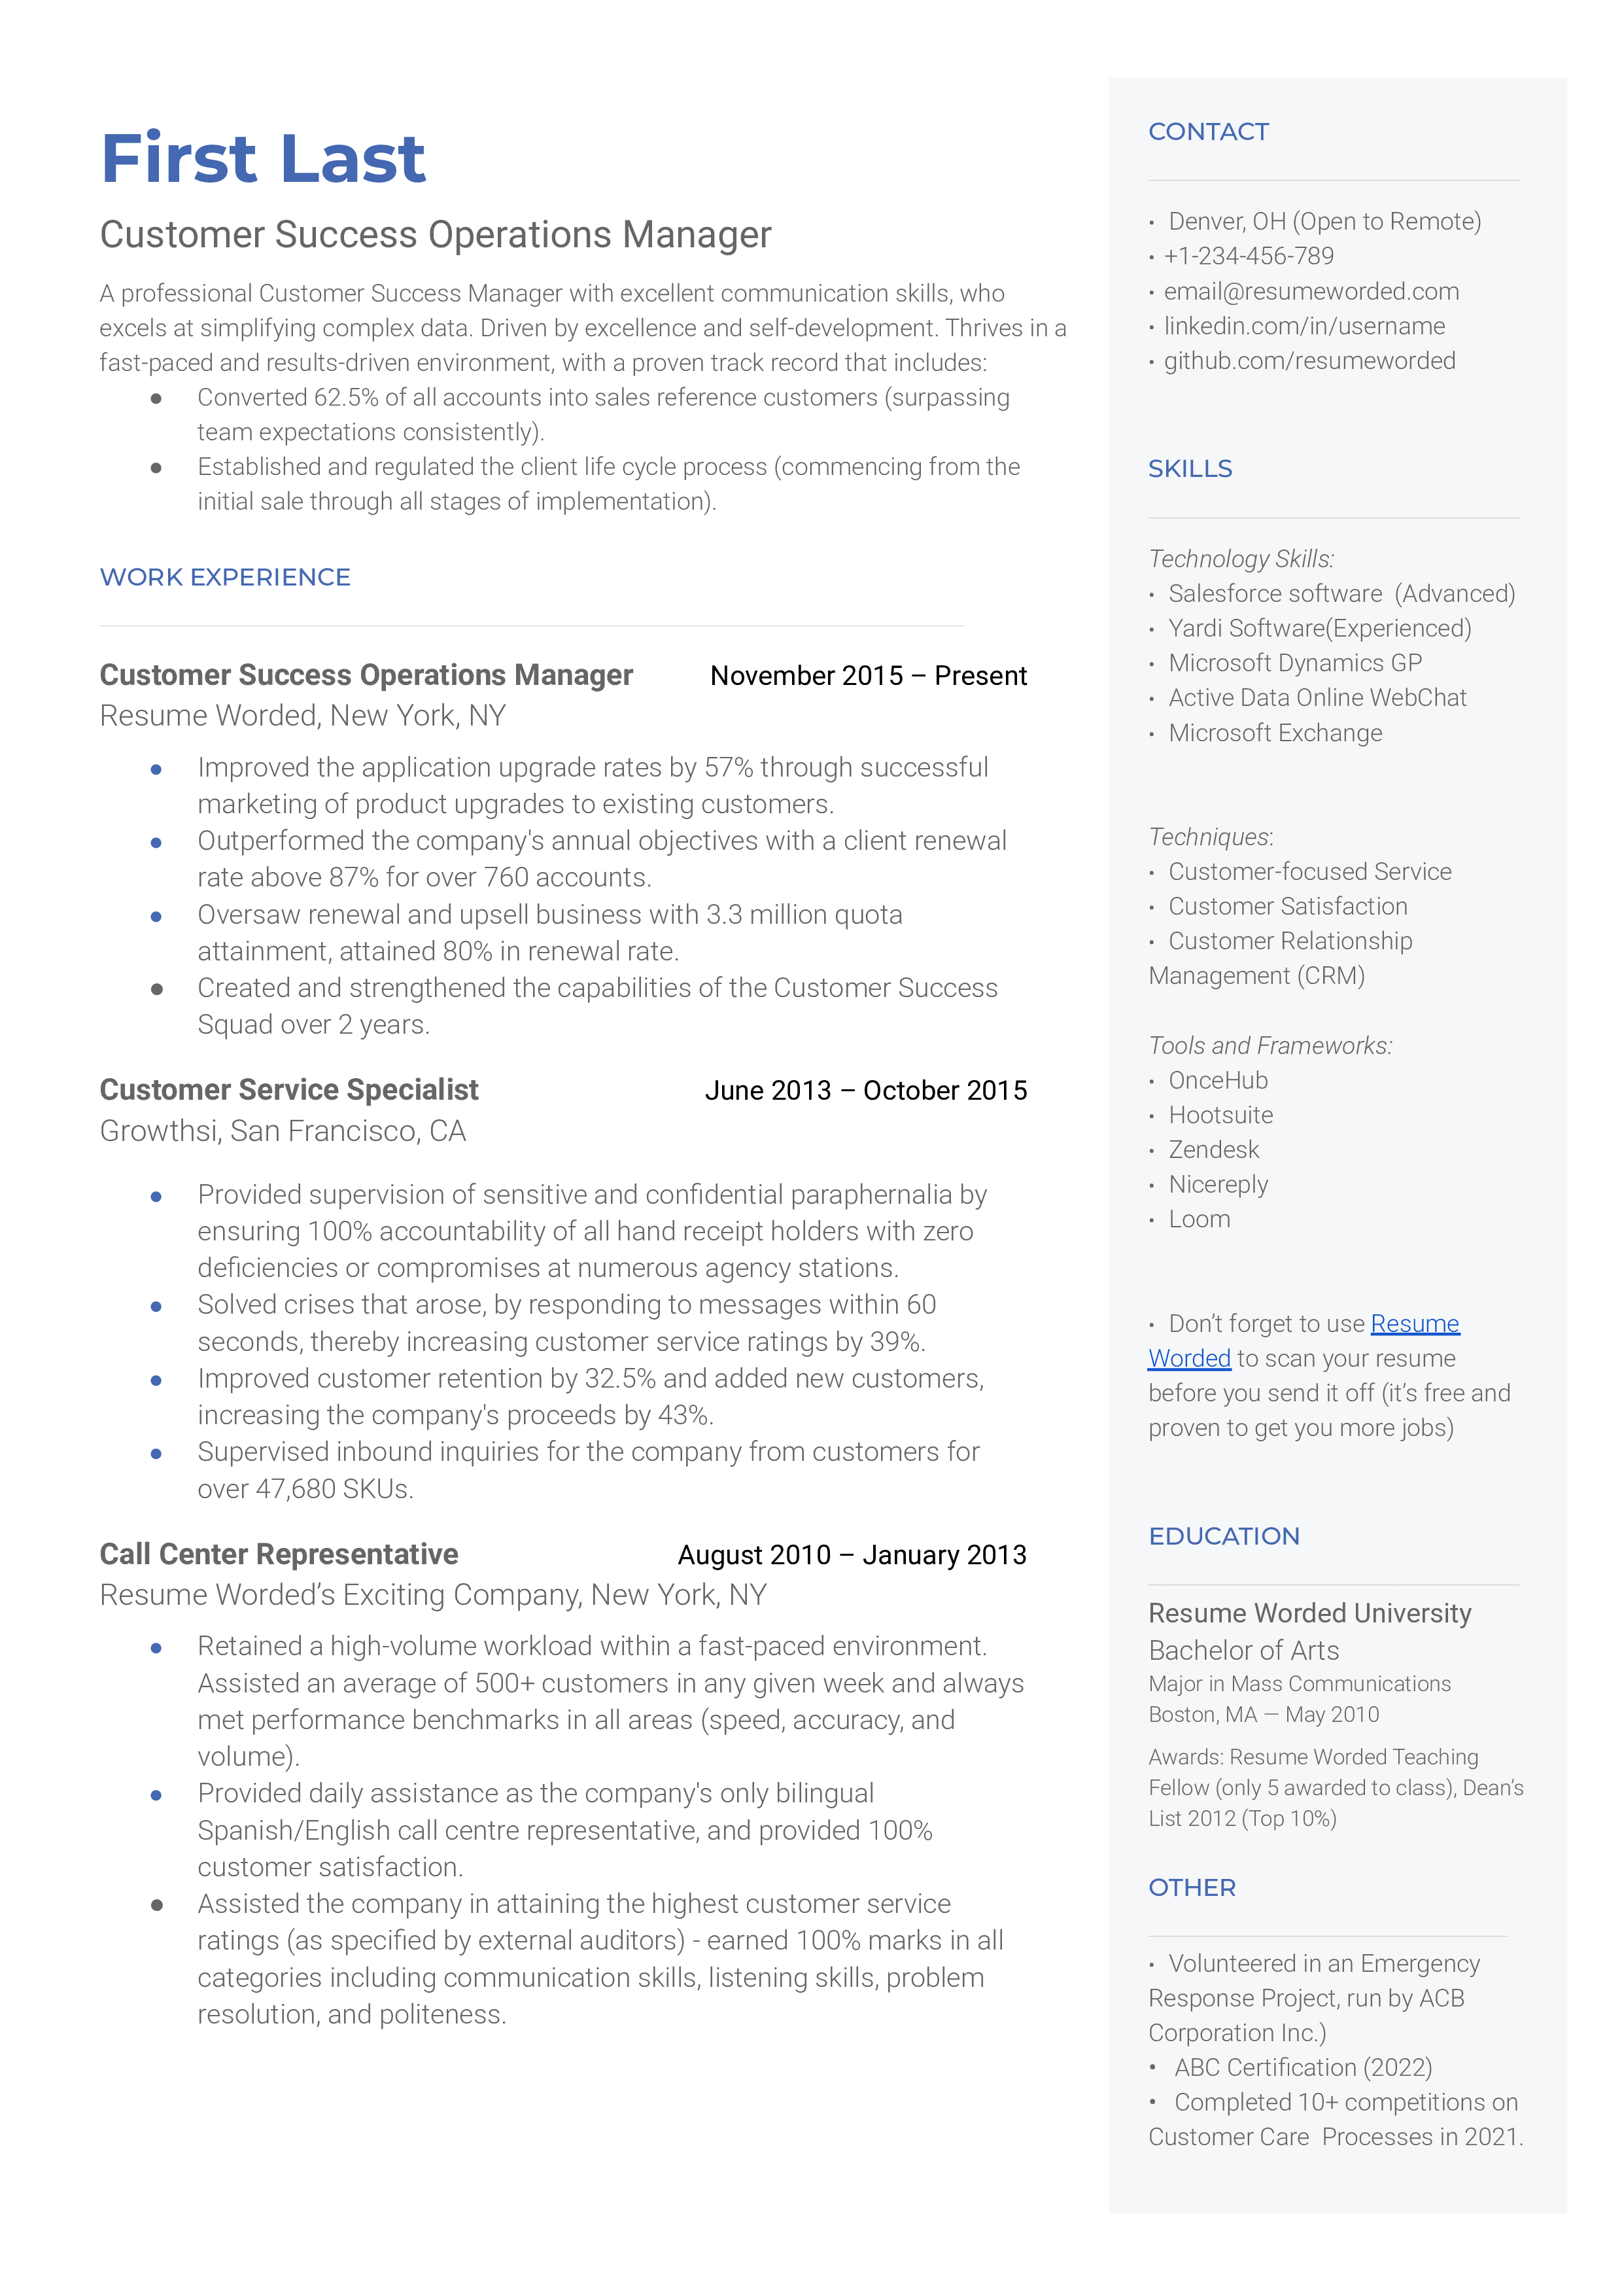 A well-structured CV for a Customer Success Operations Manager role.